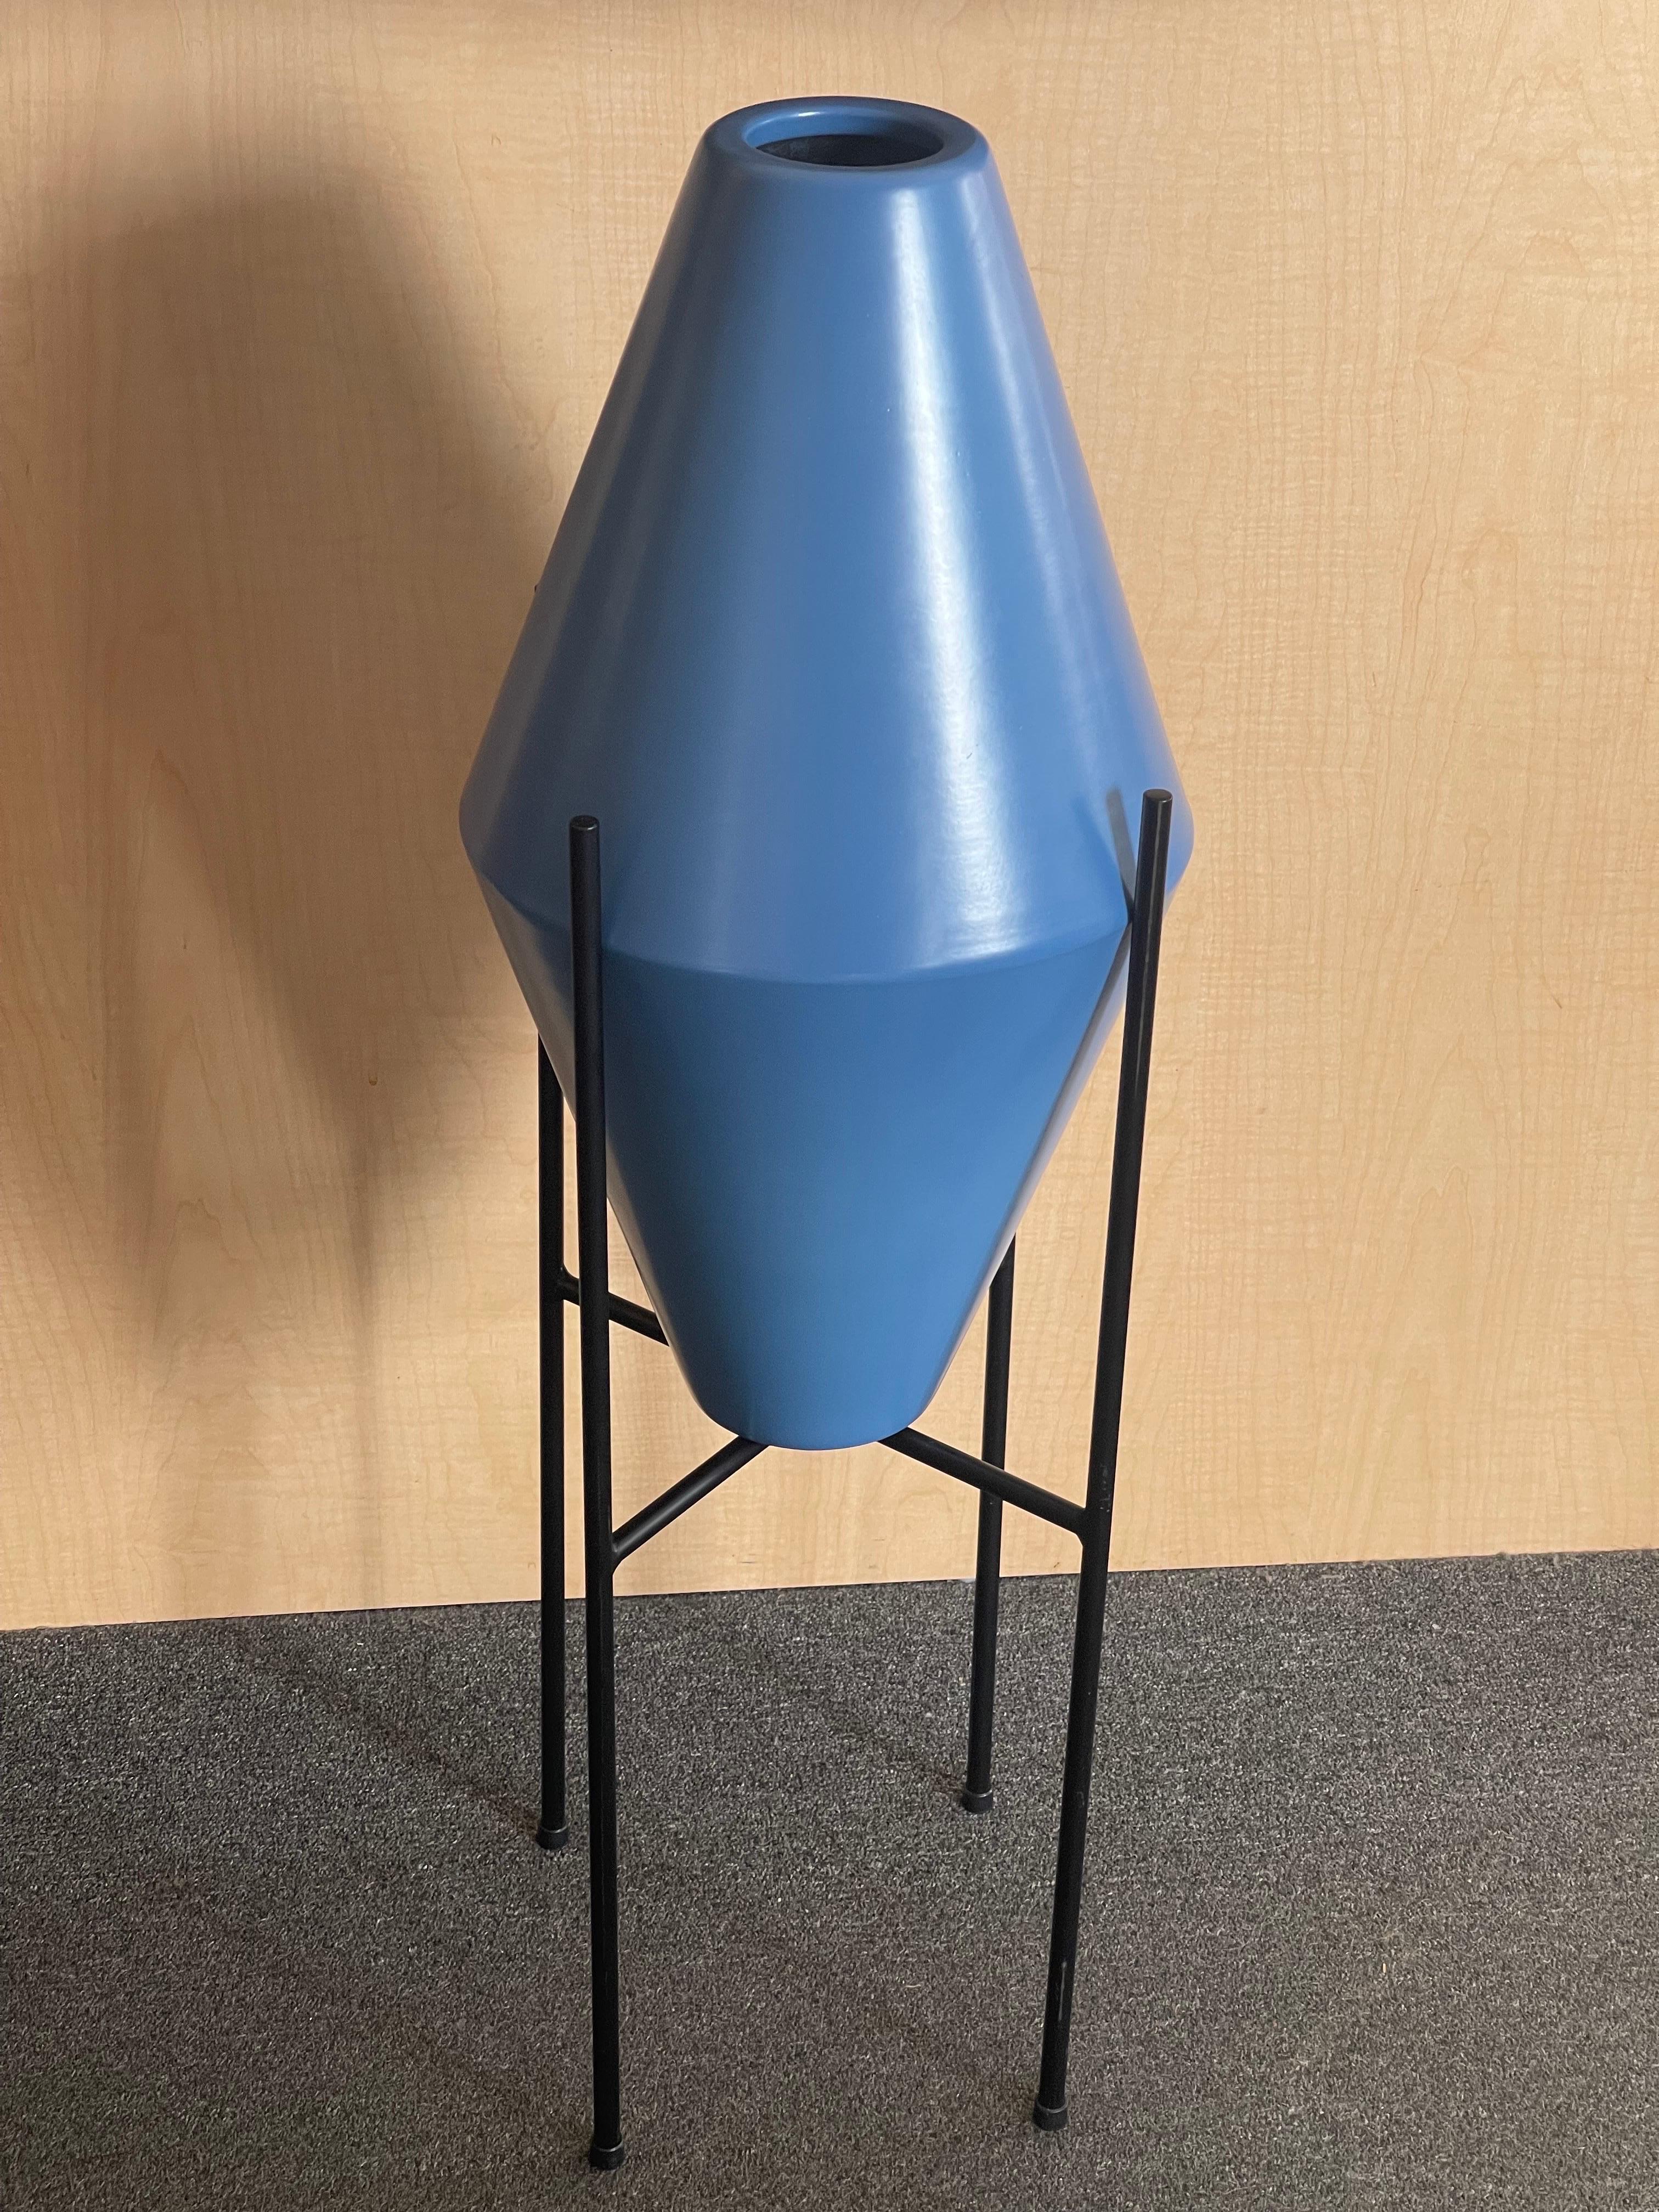 A gorgeous double cone vessel / planter on metal stand by Architectural Pottery, circa 2000s. The planter has a beautiful matte blue finish and measures 11